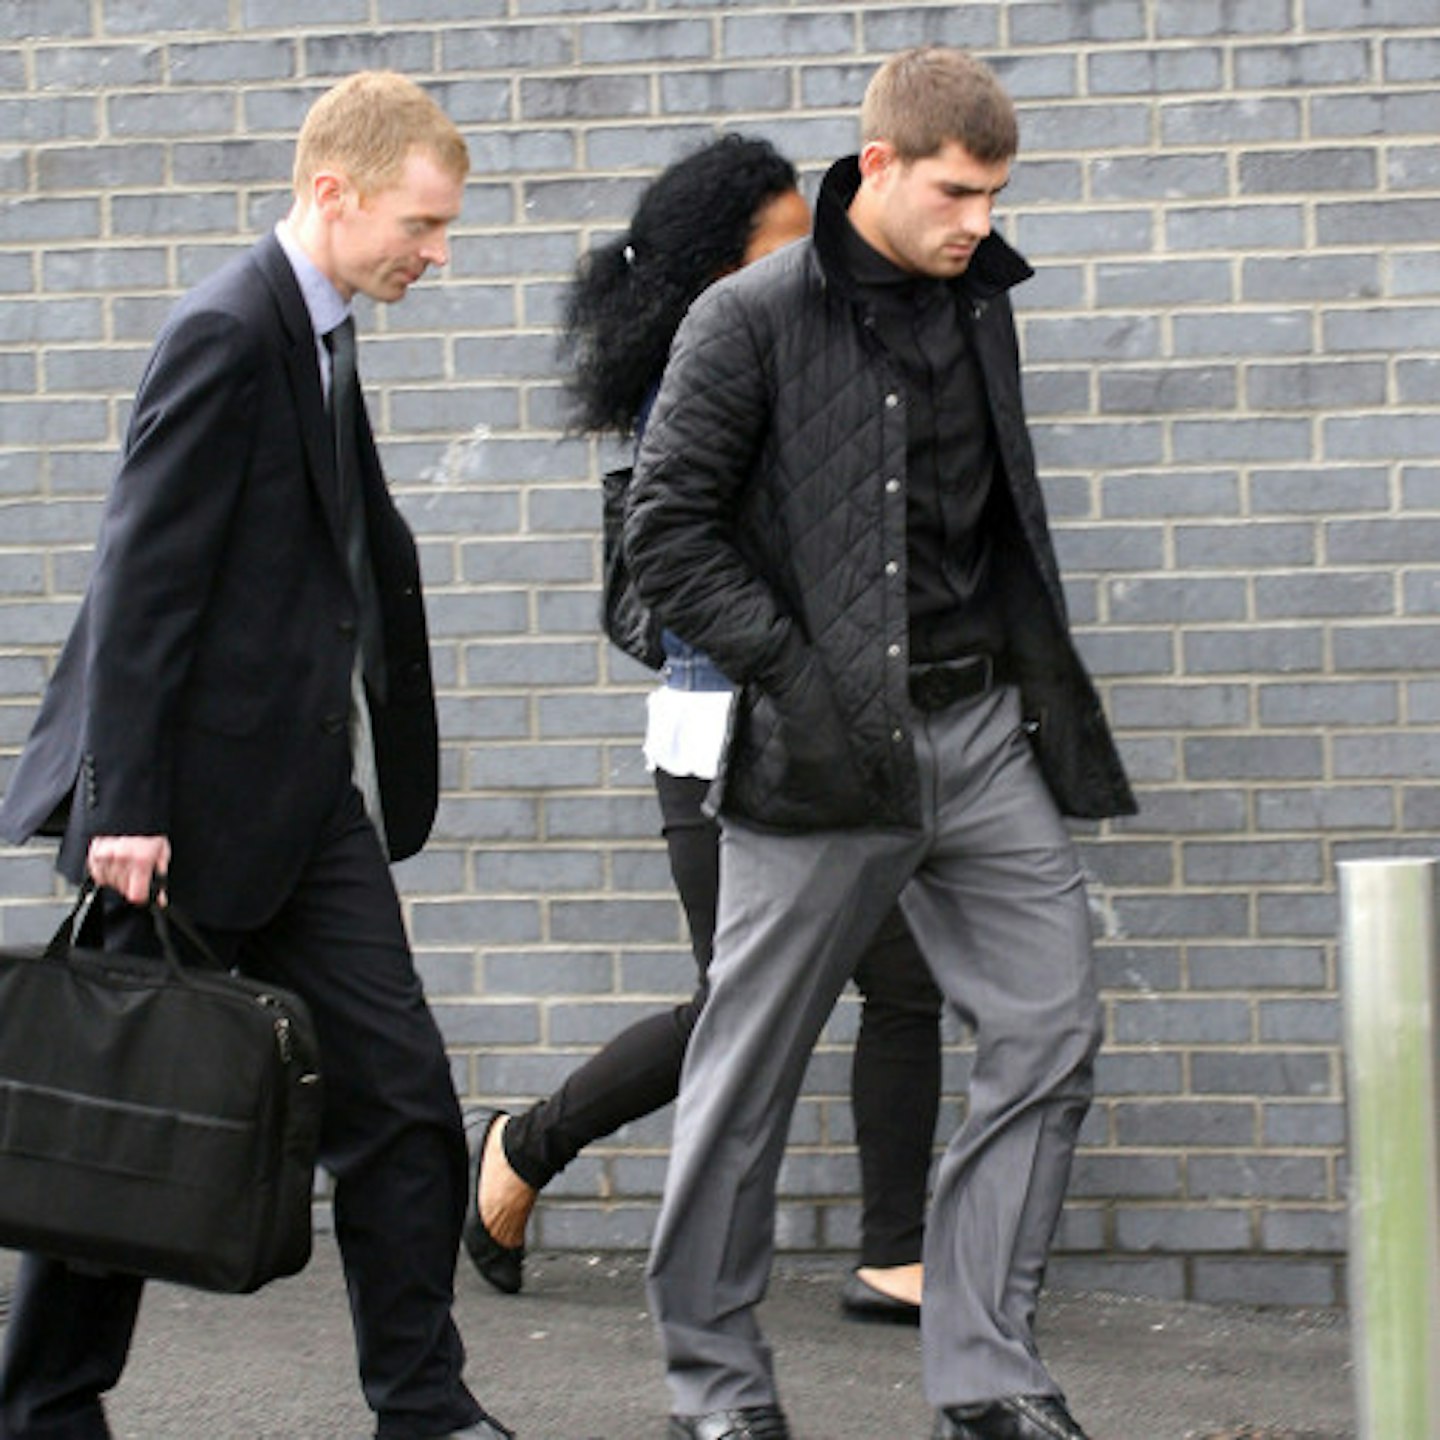 Ched Evans was sentenced to five years in prison